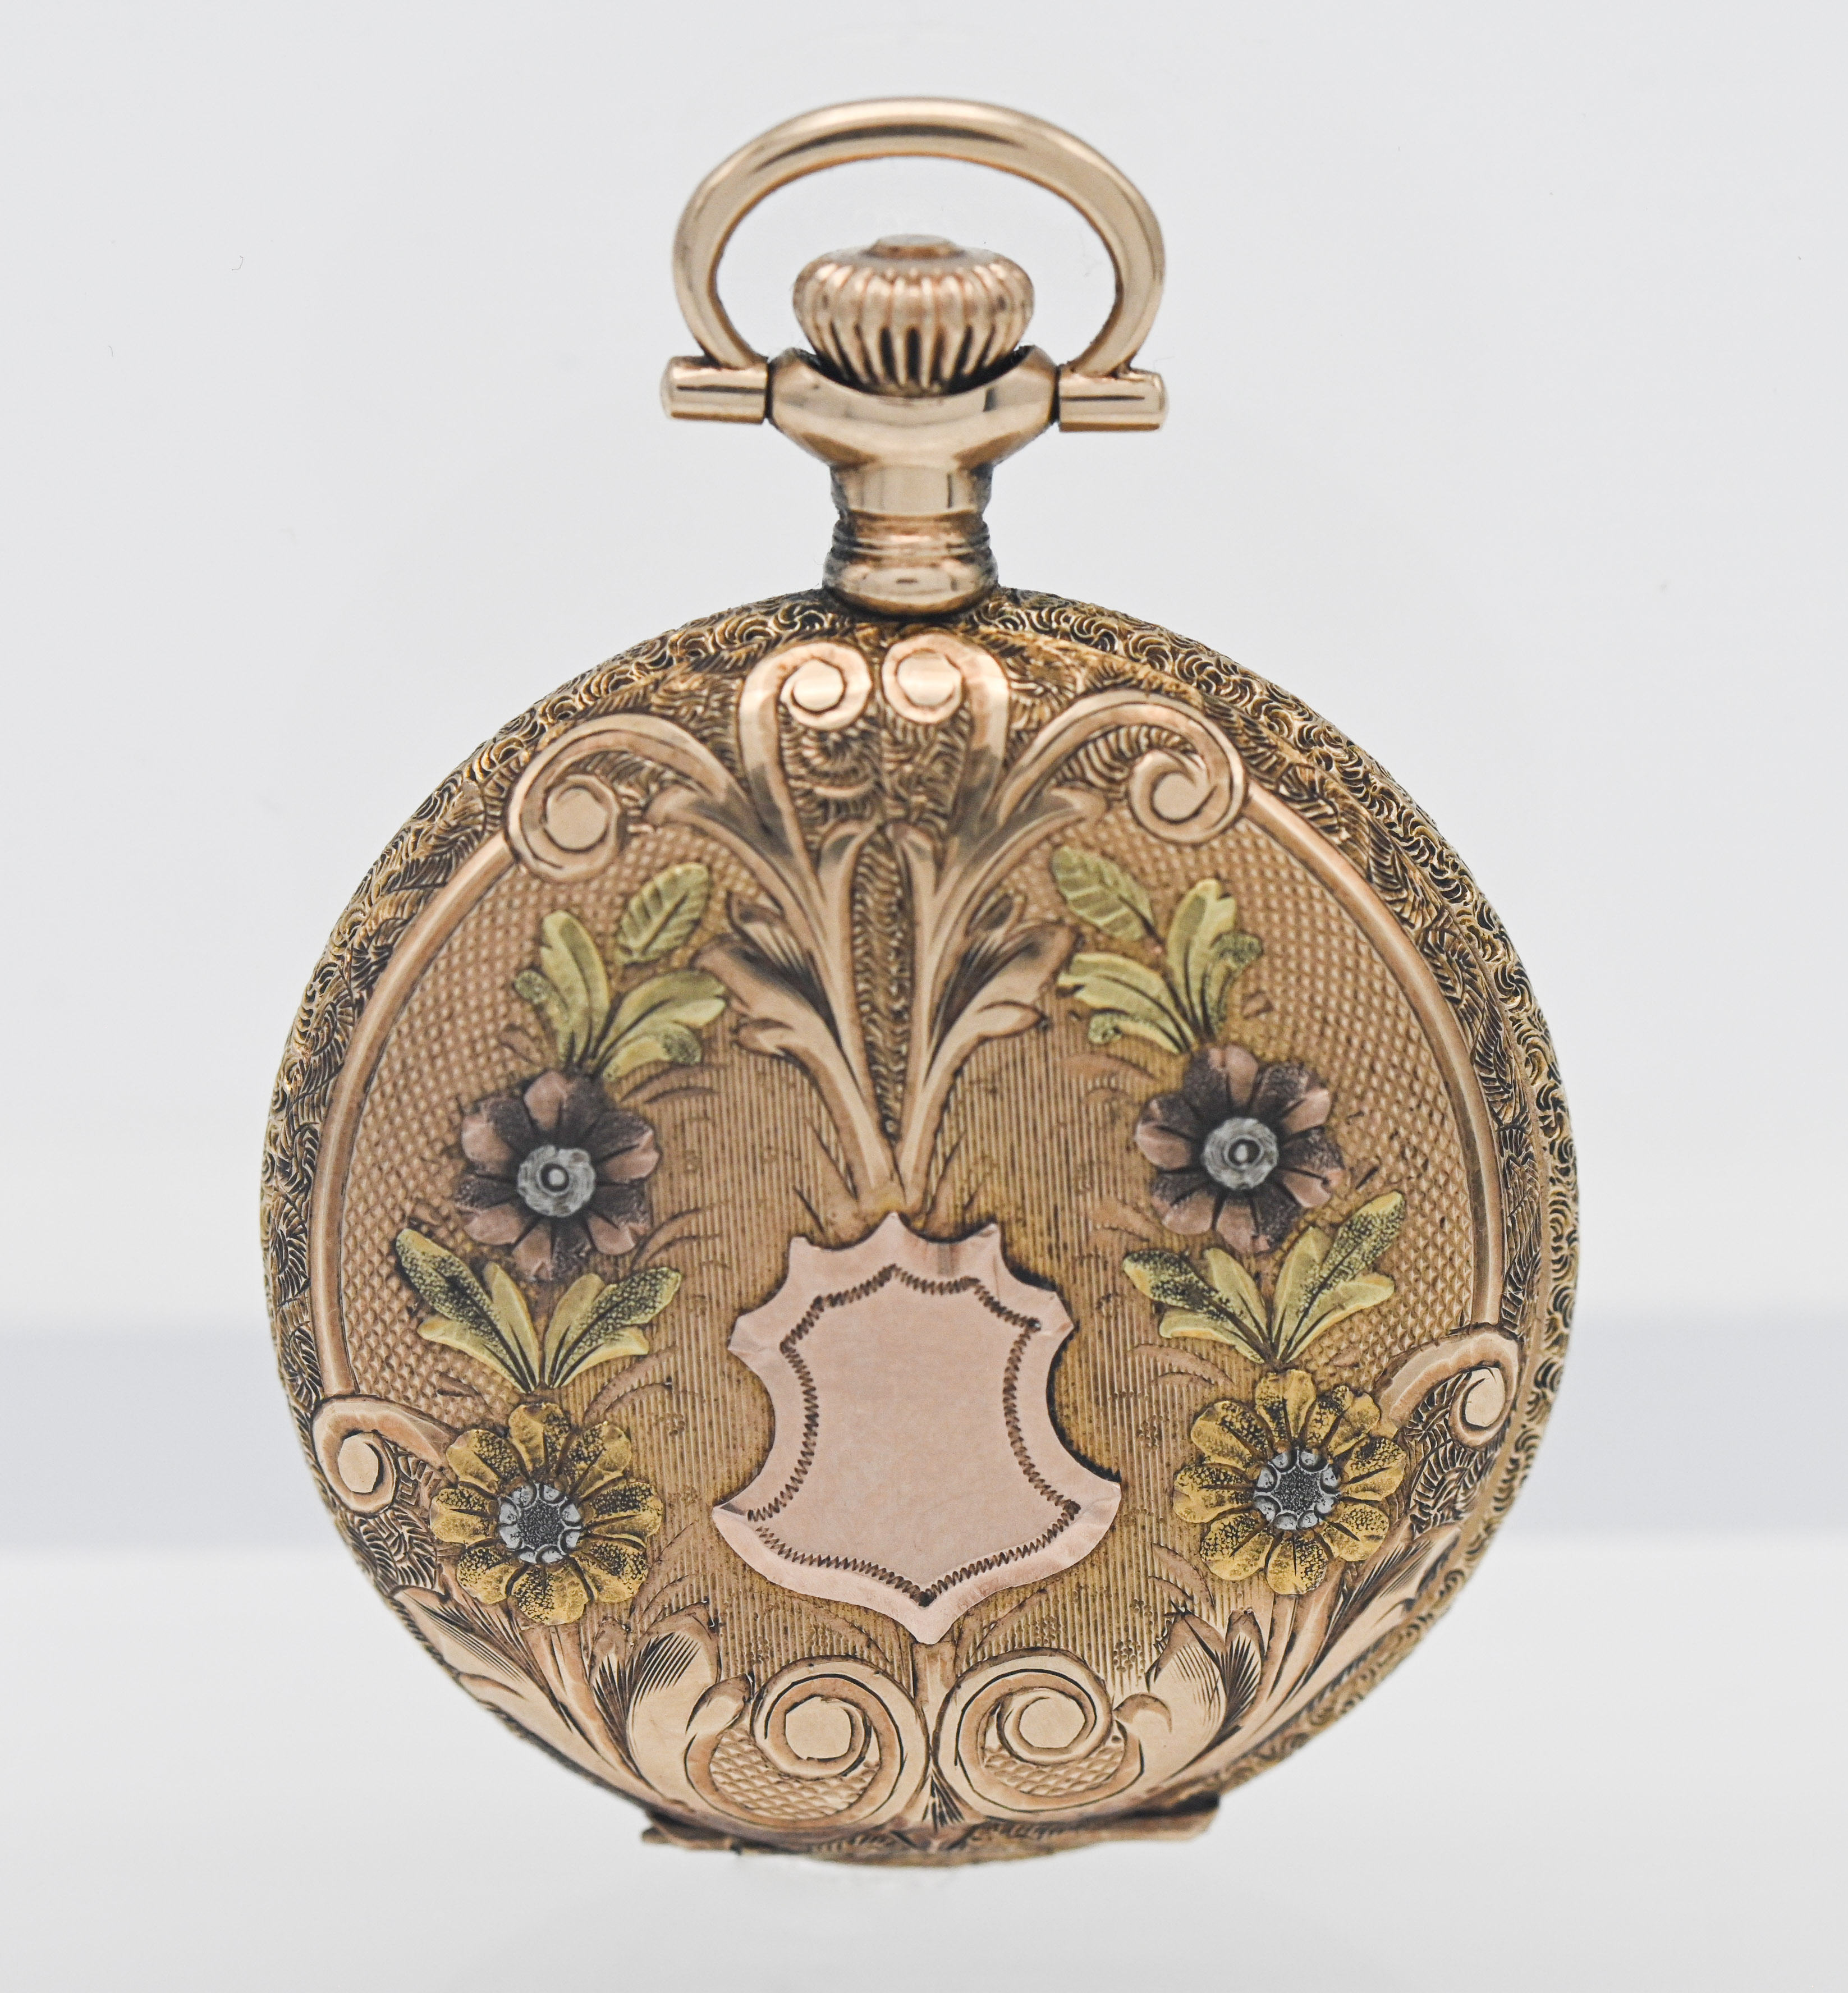 A 14K yellow gold Waltham pendant wind pocket watch, with flower pattern (no inner glass), cased, - Image 3 of 4